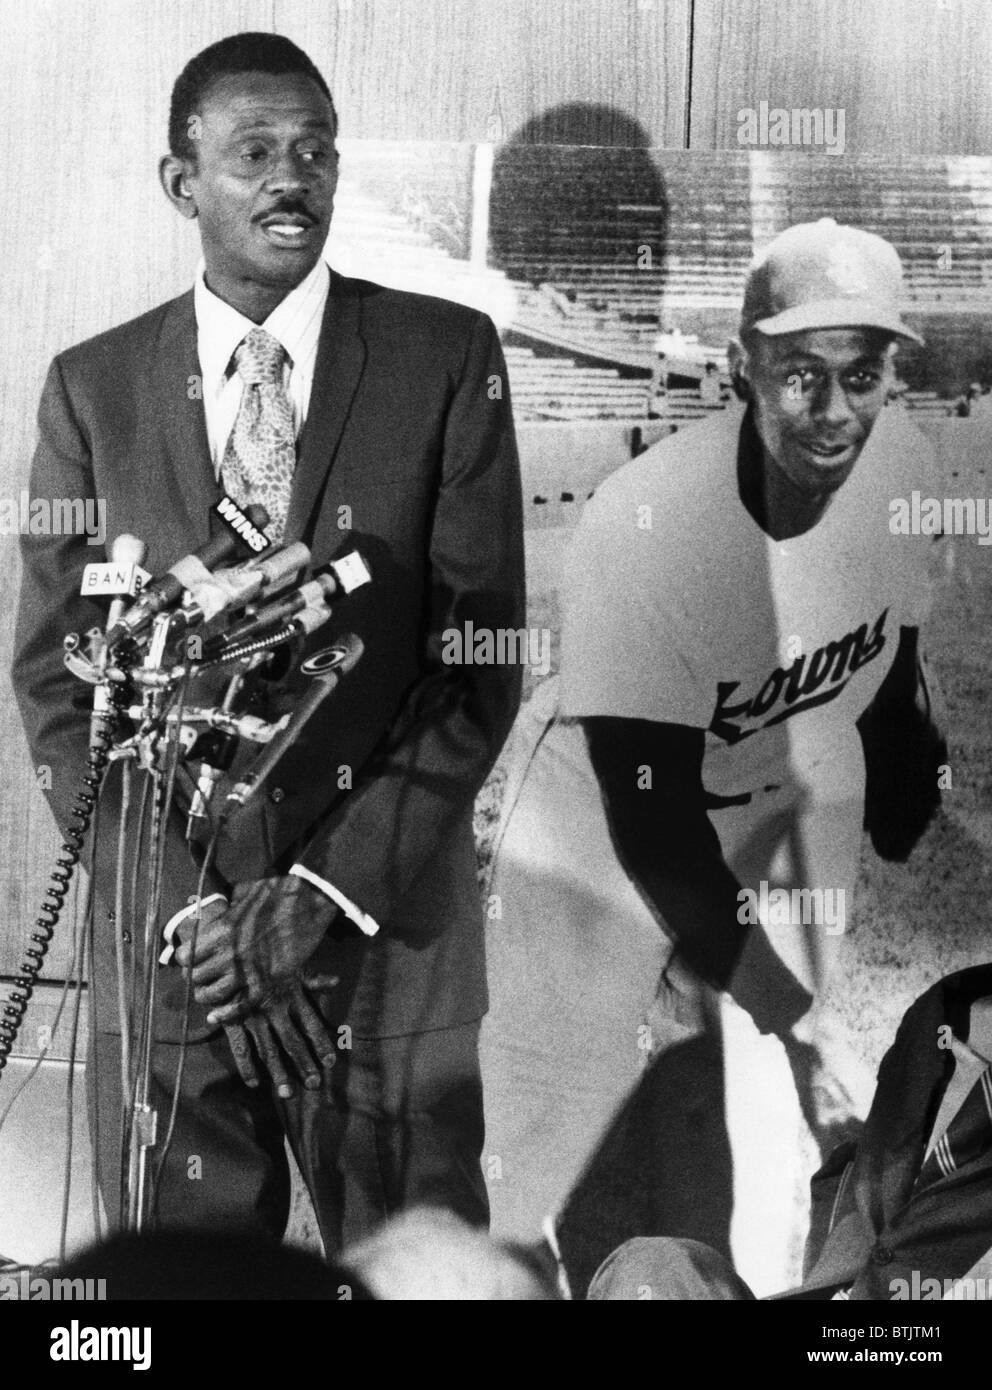 Old-Time Baseball Photos - The Great Satchel Paige Leroy Robert “Satchel”  Paige (July 7, 1906-June 8, 1982) was the most famous and successful player  from the Negro Leagues. While he was known